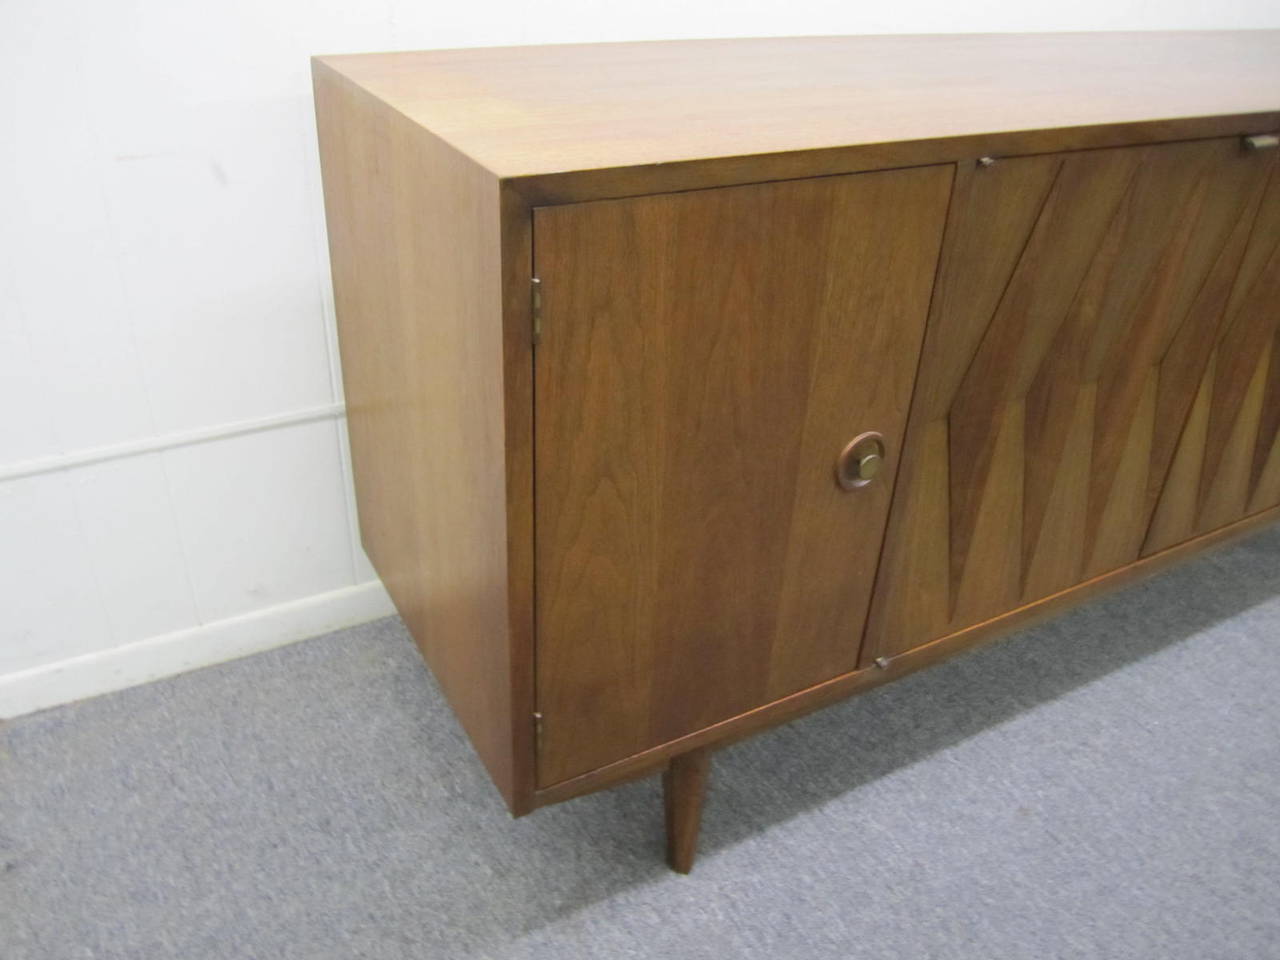 Fantastic Mid-Century dresser with gorgeous front diamond detailing, sculptural legs, finished in a rich medium walnut. The fabulously carved walnut doors open to reveal two drawers and an open space below. The doors on either side open to reveal